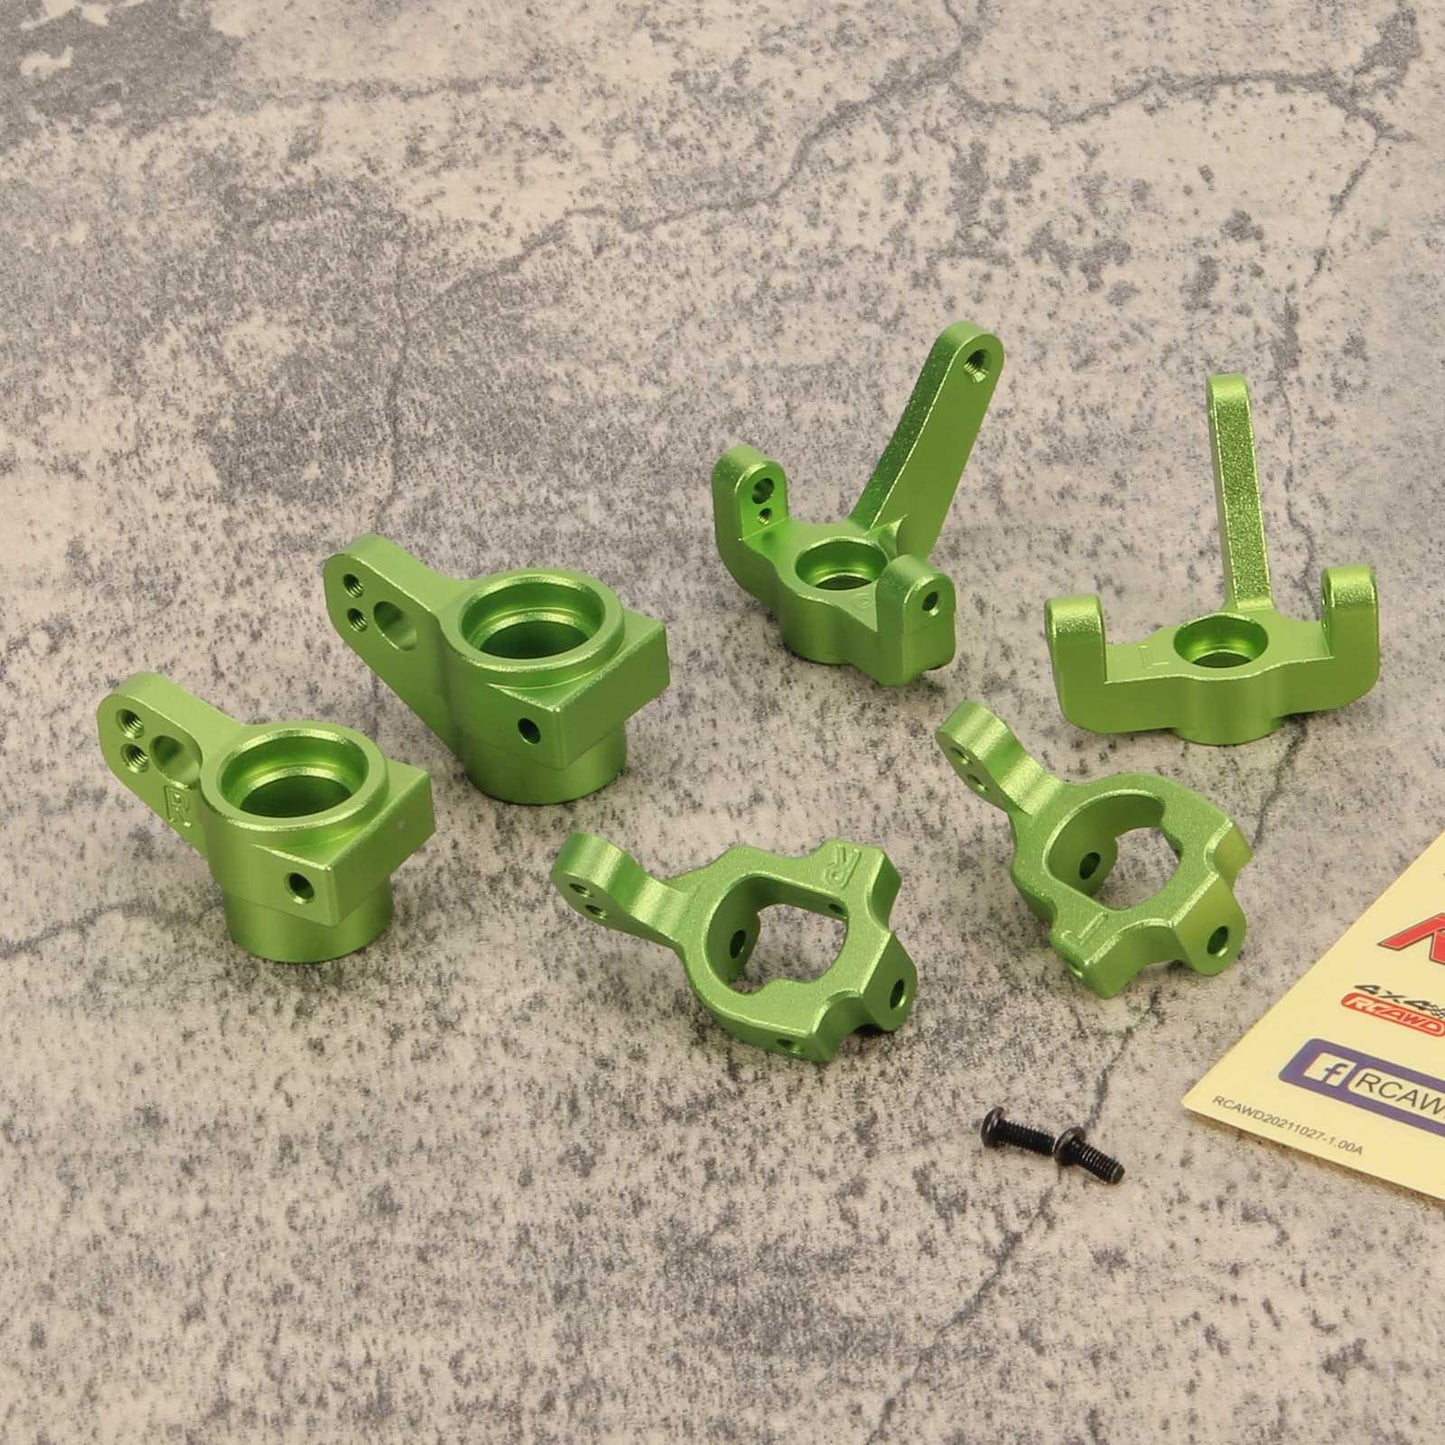 RCAWD Losi 22S Green RCAWD Losi 22s Upgrades Caster Block Set & Rear Hub Set & Front Spindle Set 6pcs for Camaro Ford F100